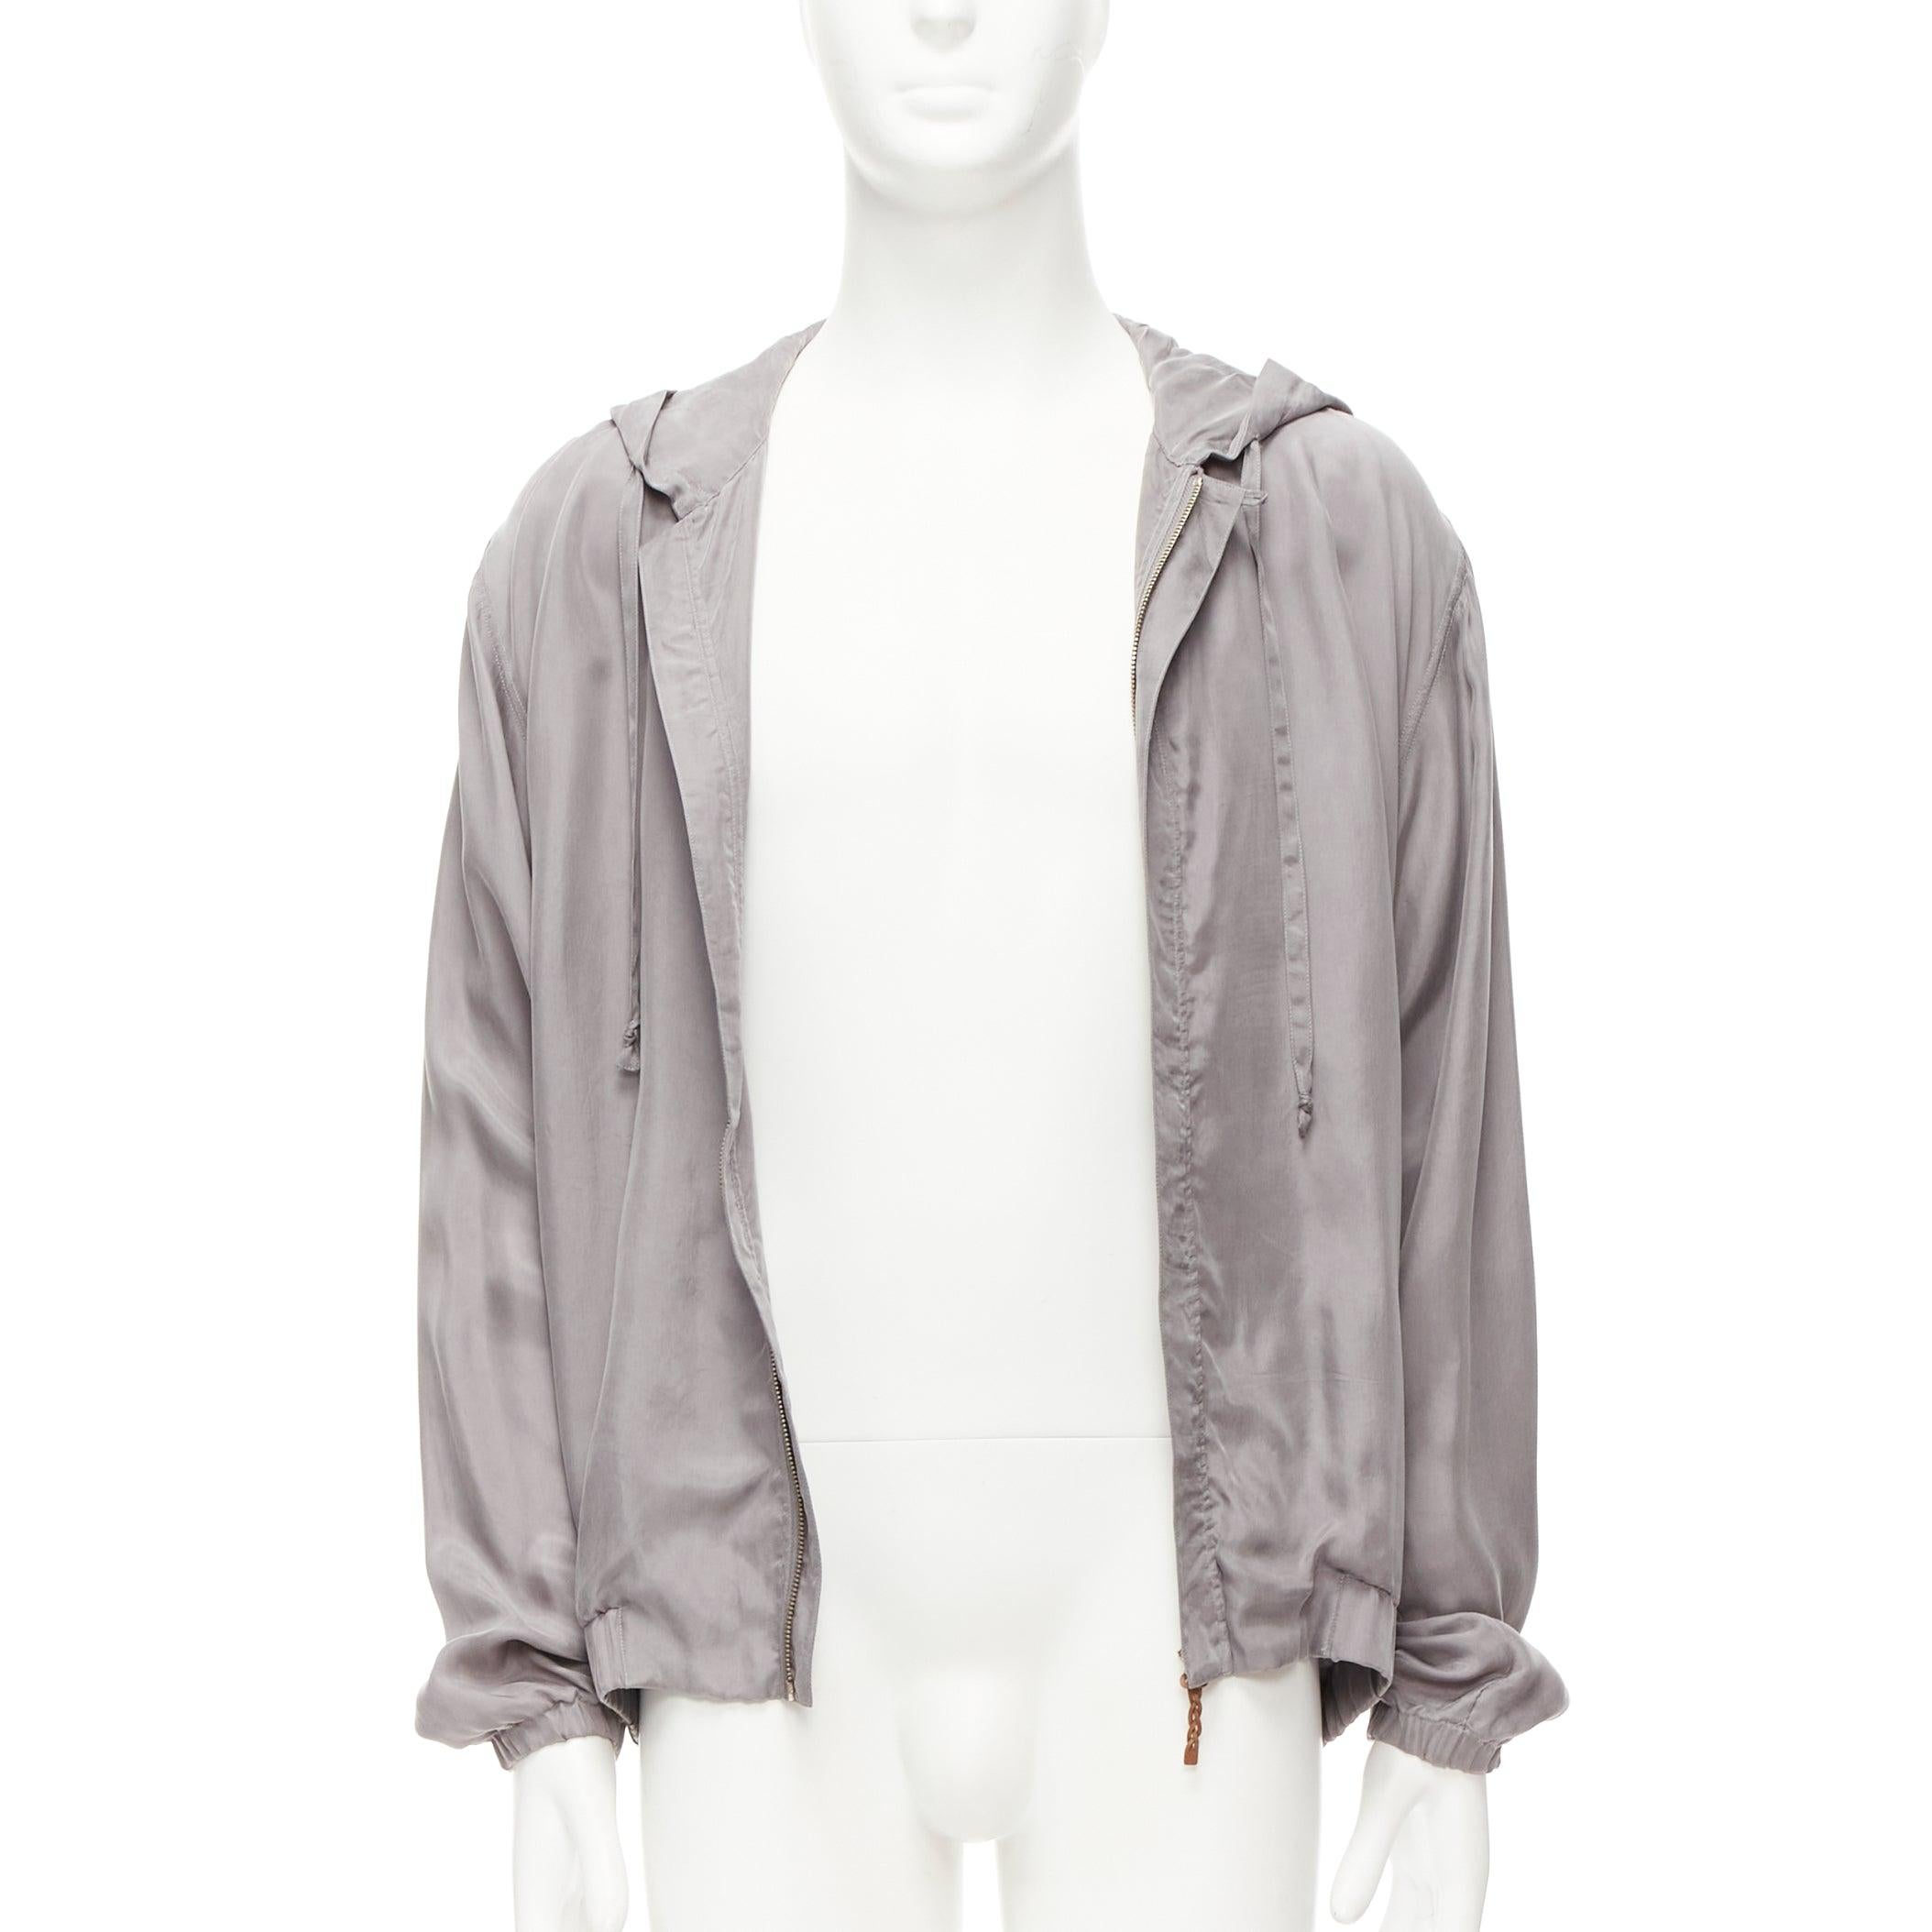 LA PERLA grey silky invisible zipper brown leather tab elastic cuff hoodie M
Reference: CNLE/A00288
Brand: La Perla
Material: Cupro, Blend
Color: Grey
Pattern: Solid
Closure: Zip
Extra Details: Brown leather zipper head tab.
Made in: